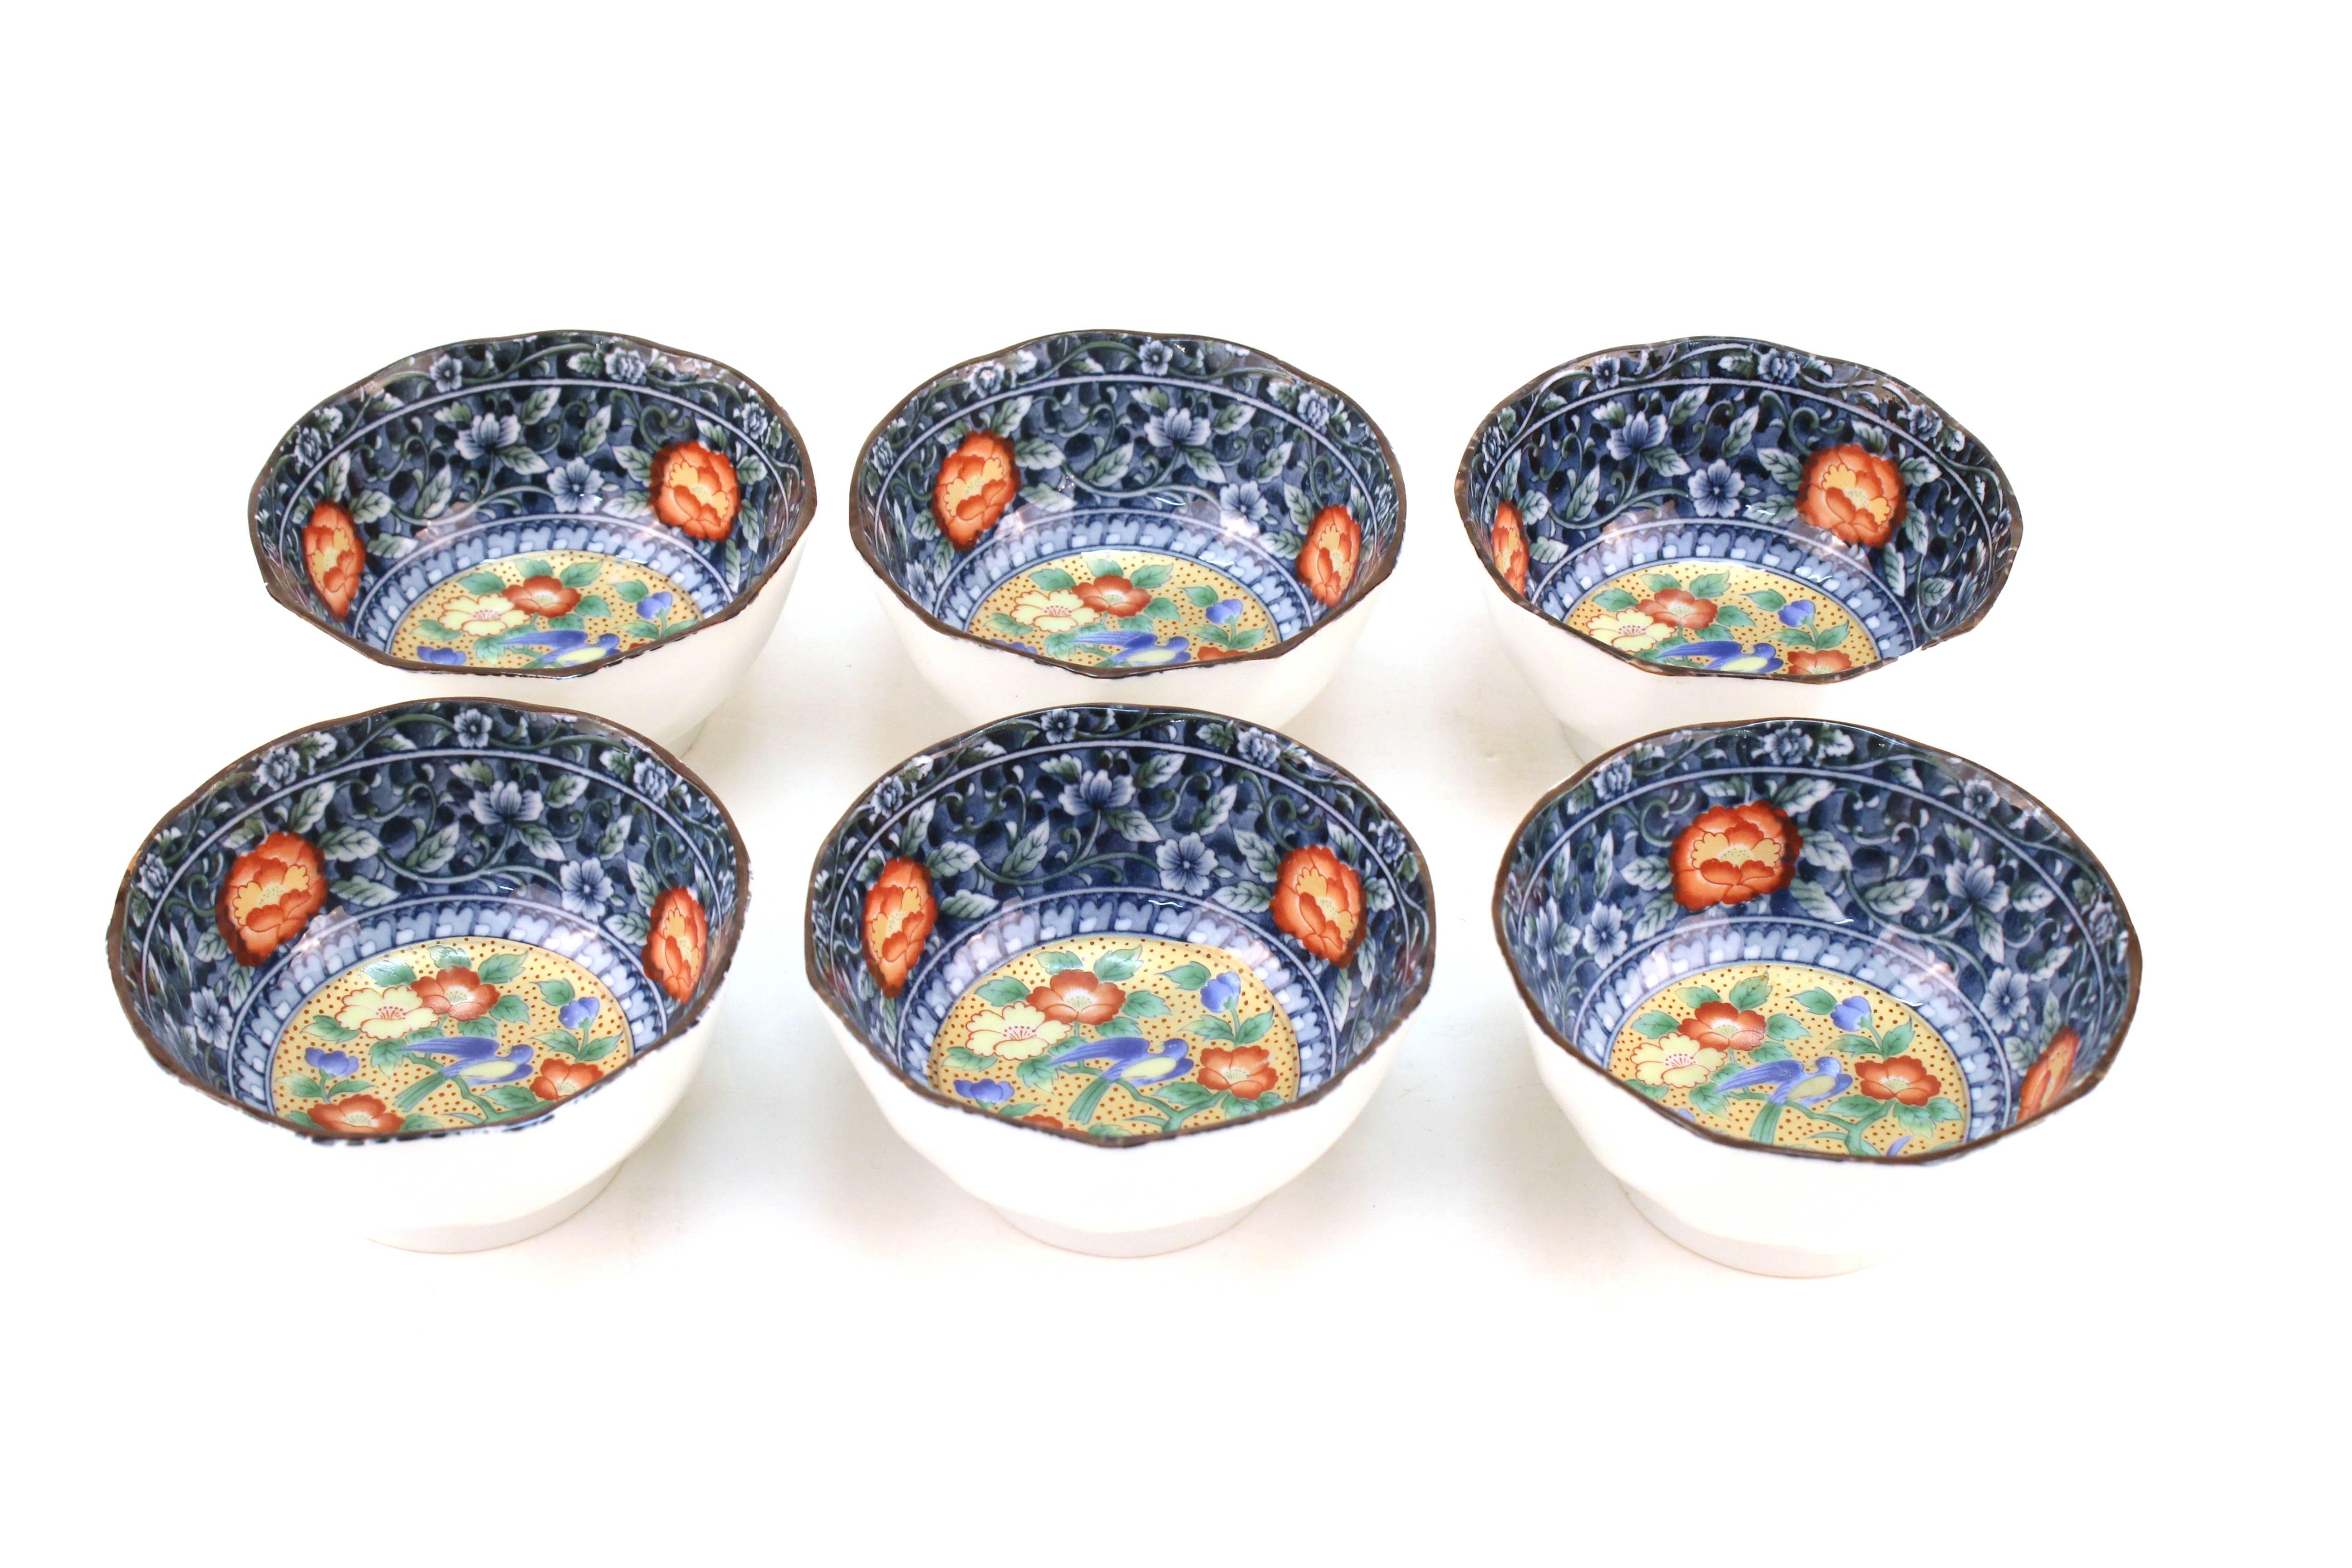 Set of Japanese bowls crafted in ceramic. All six pieces are painted in blue with flowers. Birds decorate the bowl's interior. Stamped on the bottom. Minor wear but in overall good condition.